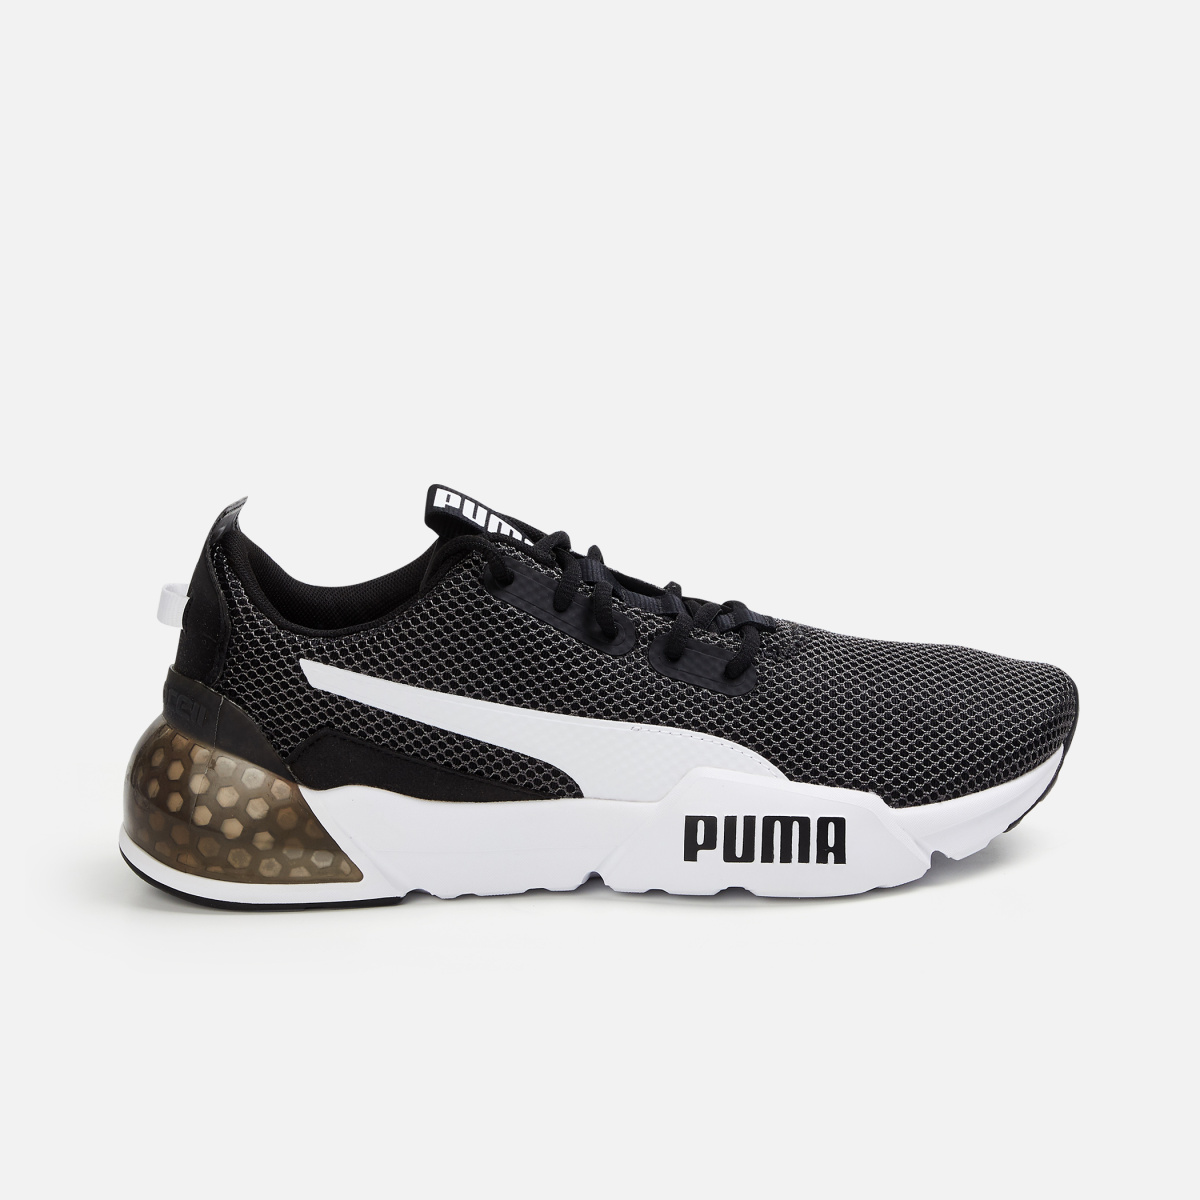 PUMA Men Lace-Up Printed Sports Shoes